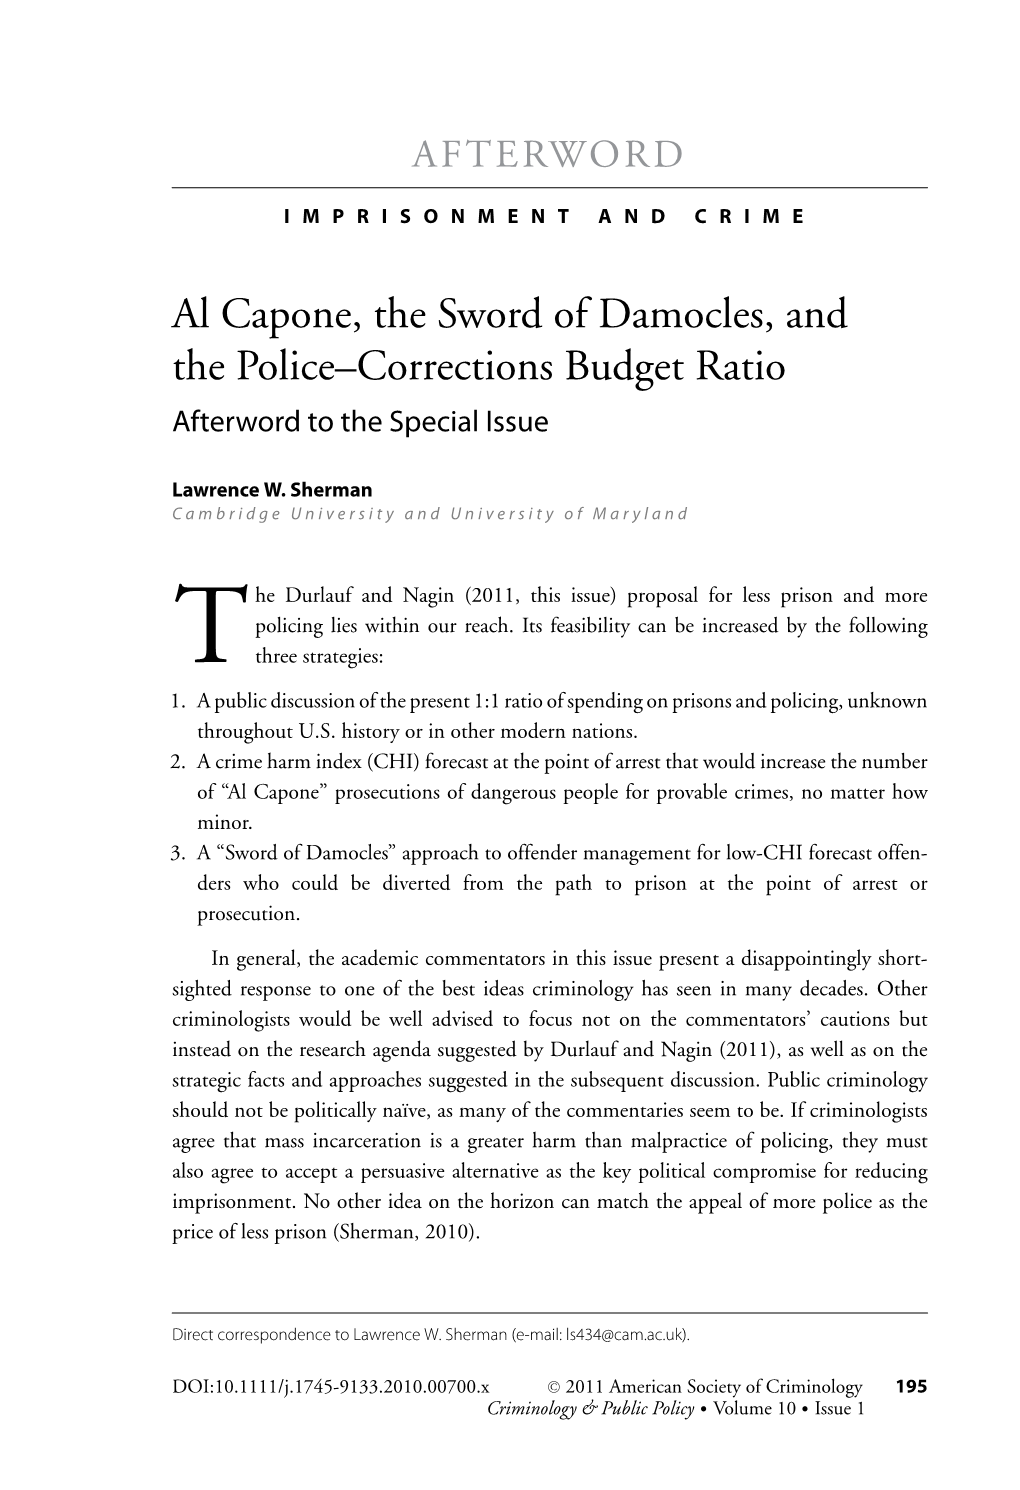 Al Capone, the Sword of Damocles, and the Policecorrections Budget